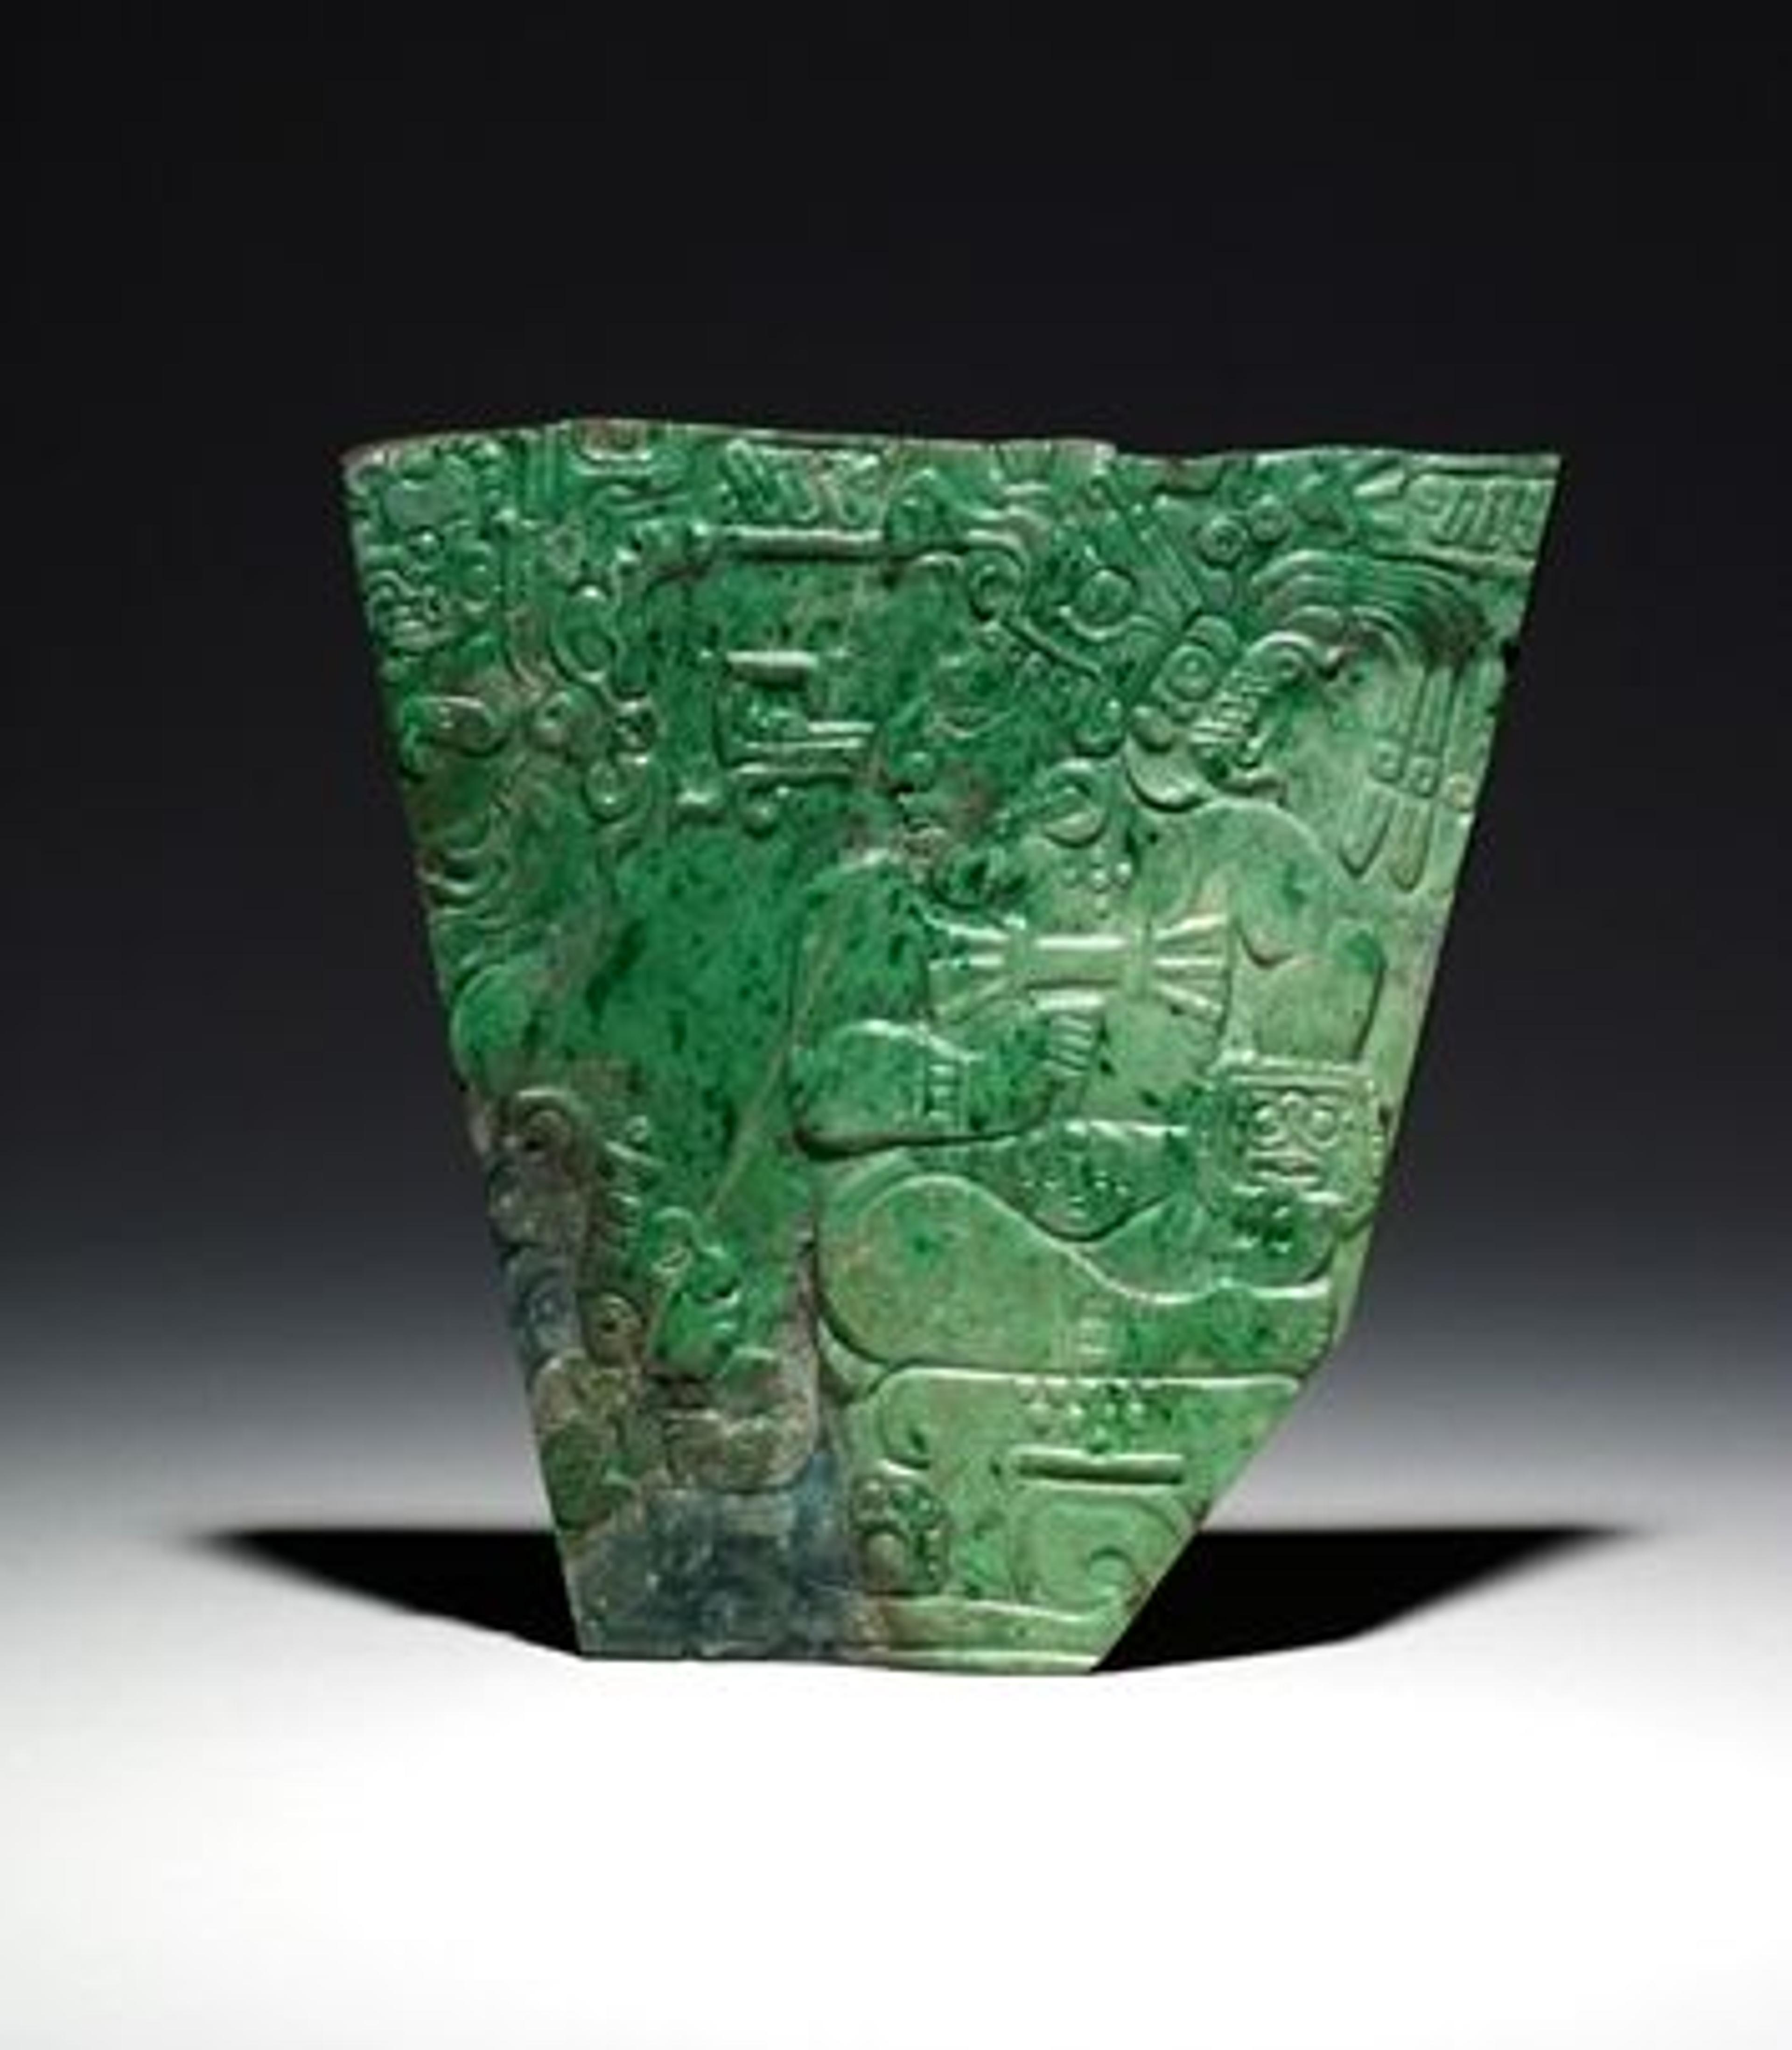 A jade plaque showing a seated king and palace attendant, made by a Maya artist sometime between A.D. 600 and 800